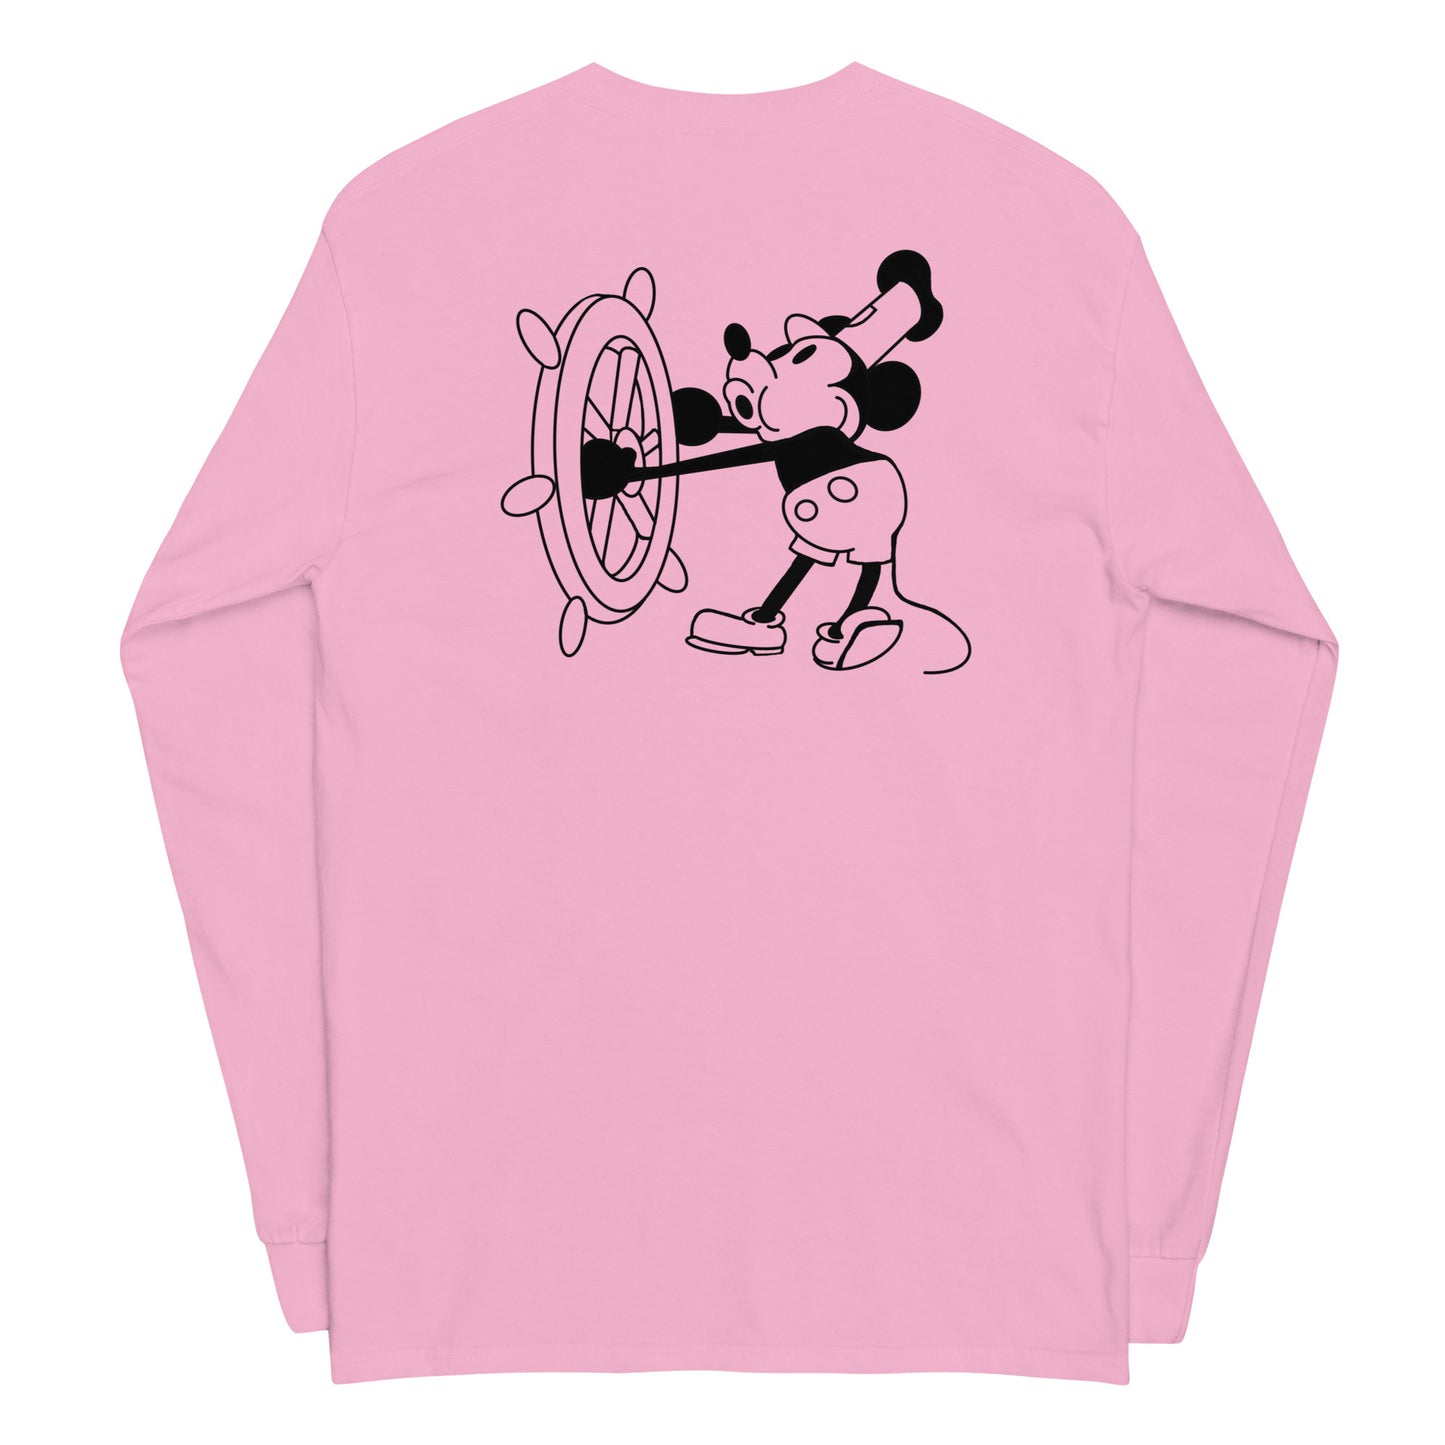 Good Day Steamboad Long Sleeve Shirt - Ghostly Tails